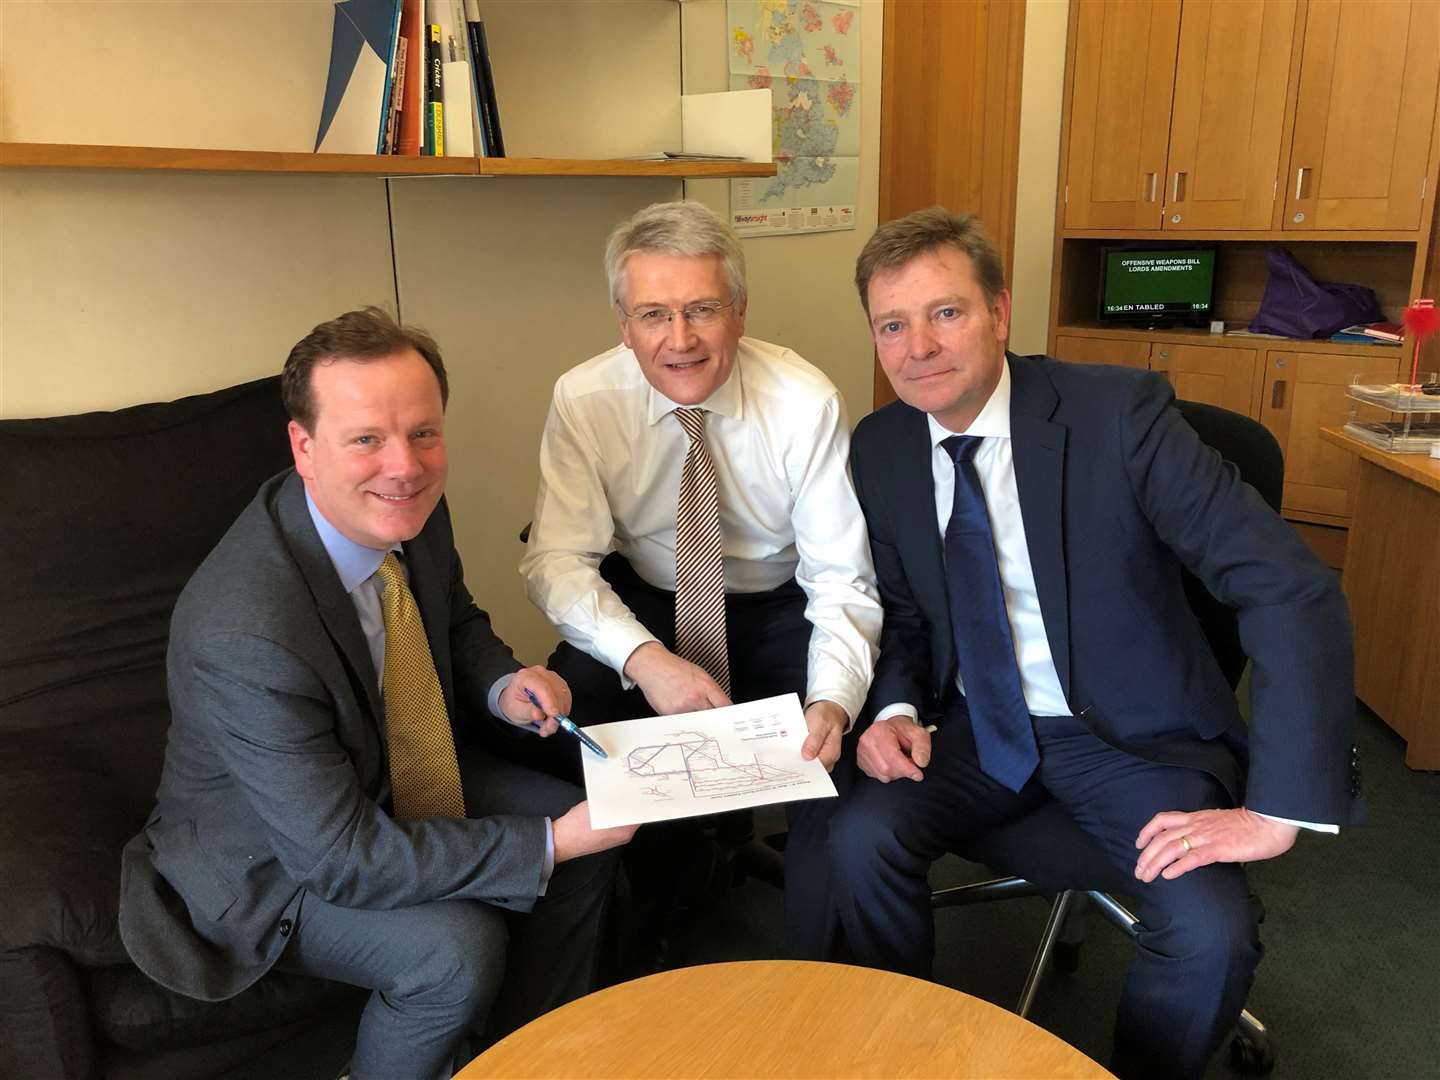 MPs Charlie Elphicke and Craig Mackinlay with rail minister Andrew Jones (centre) (8306433)